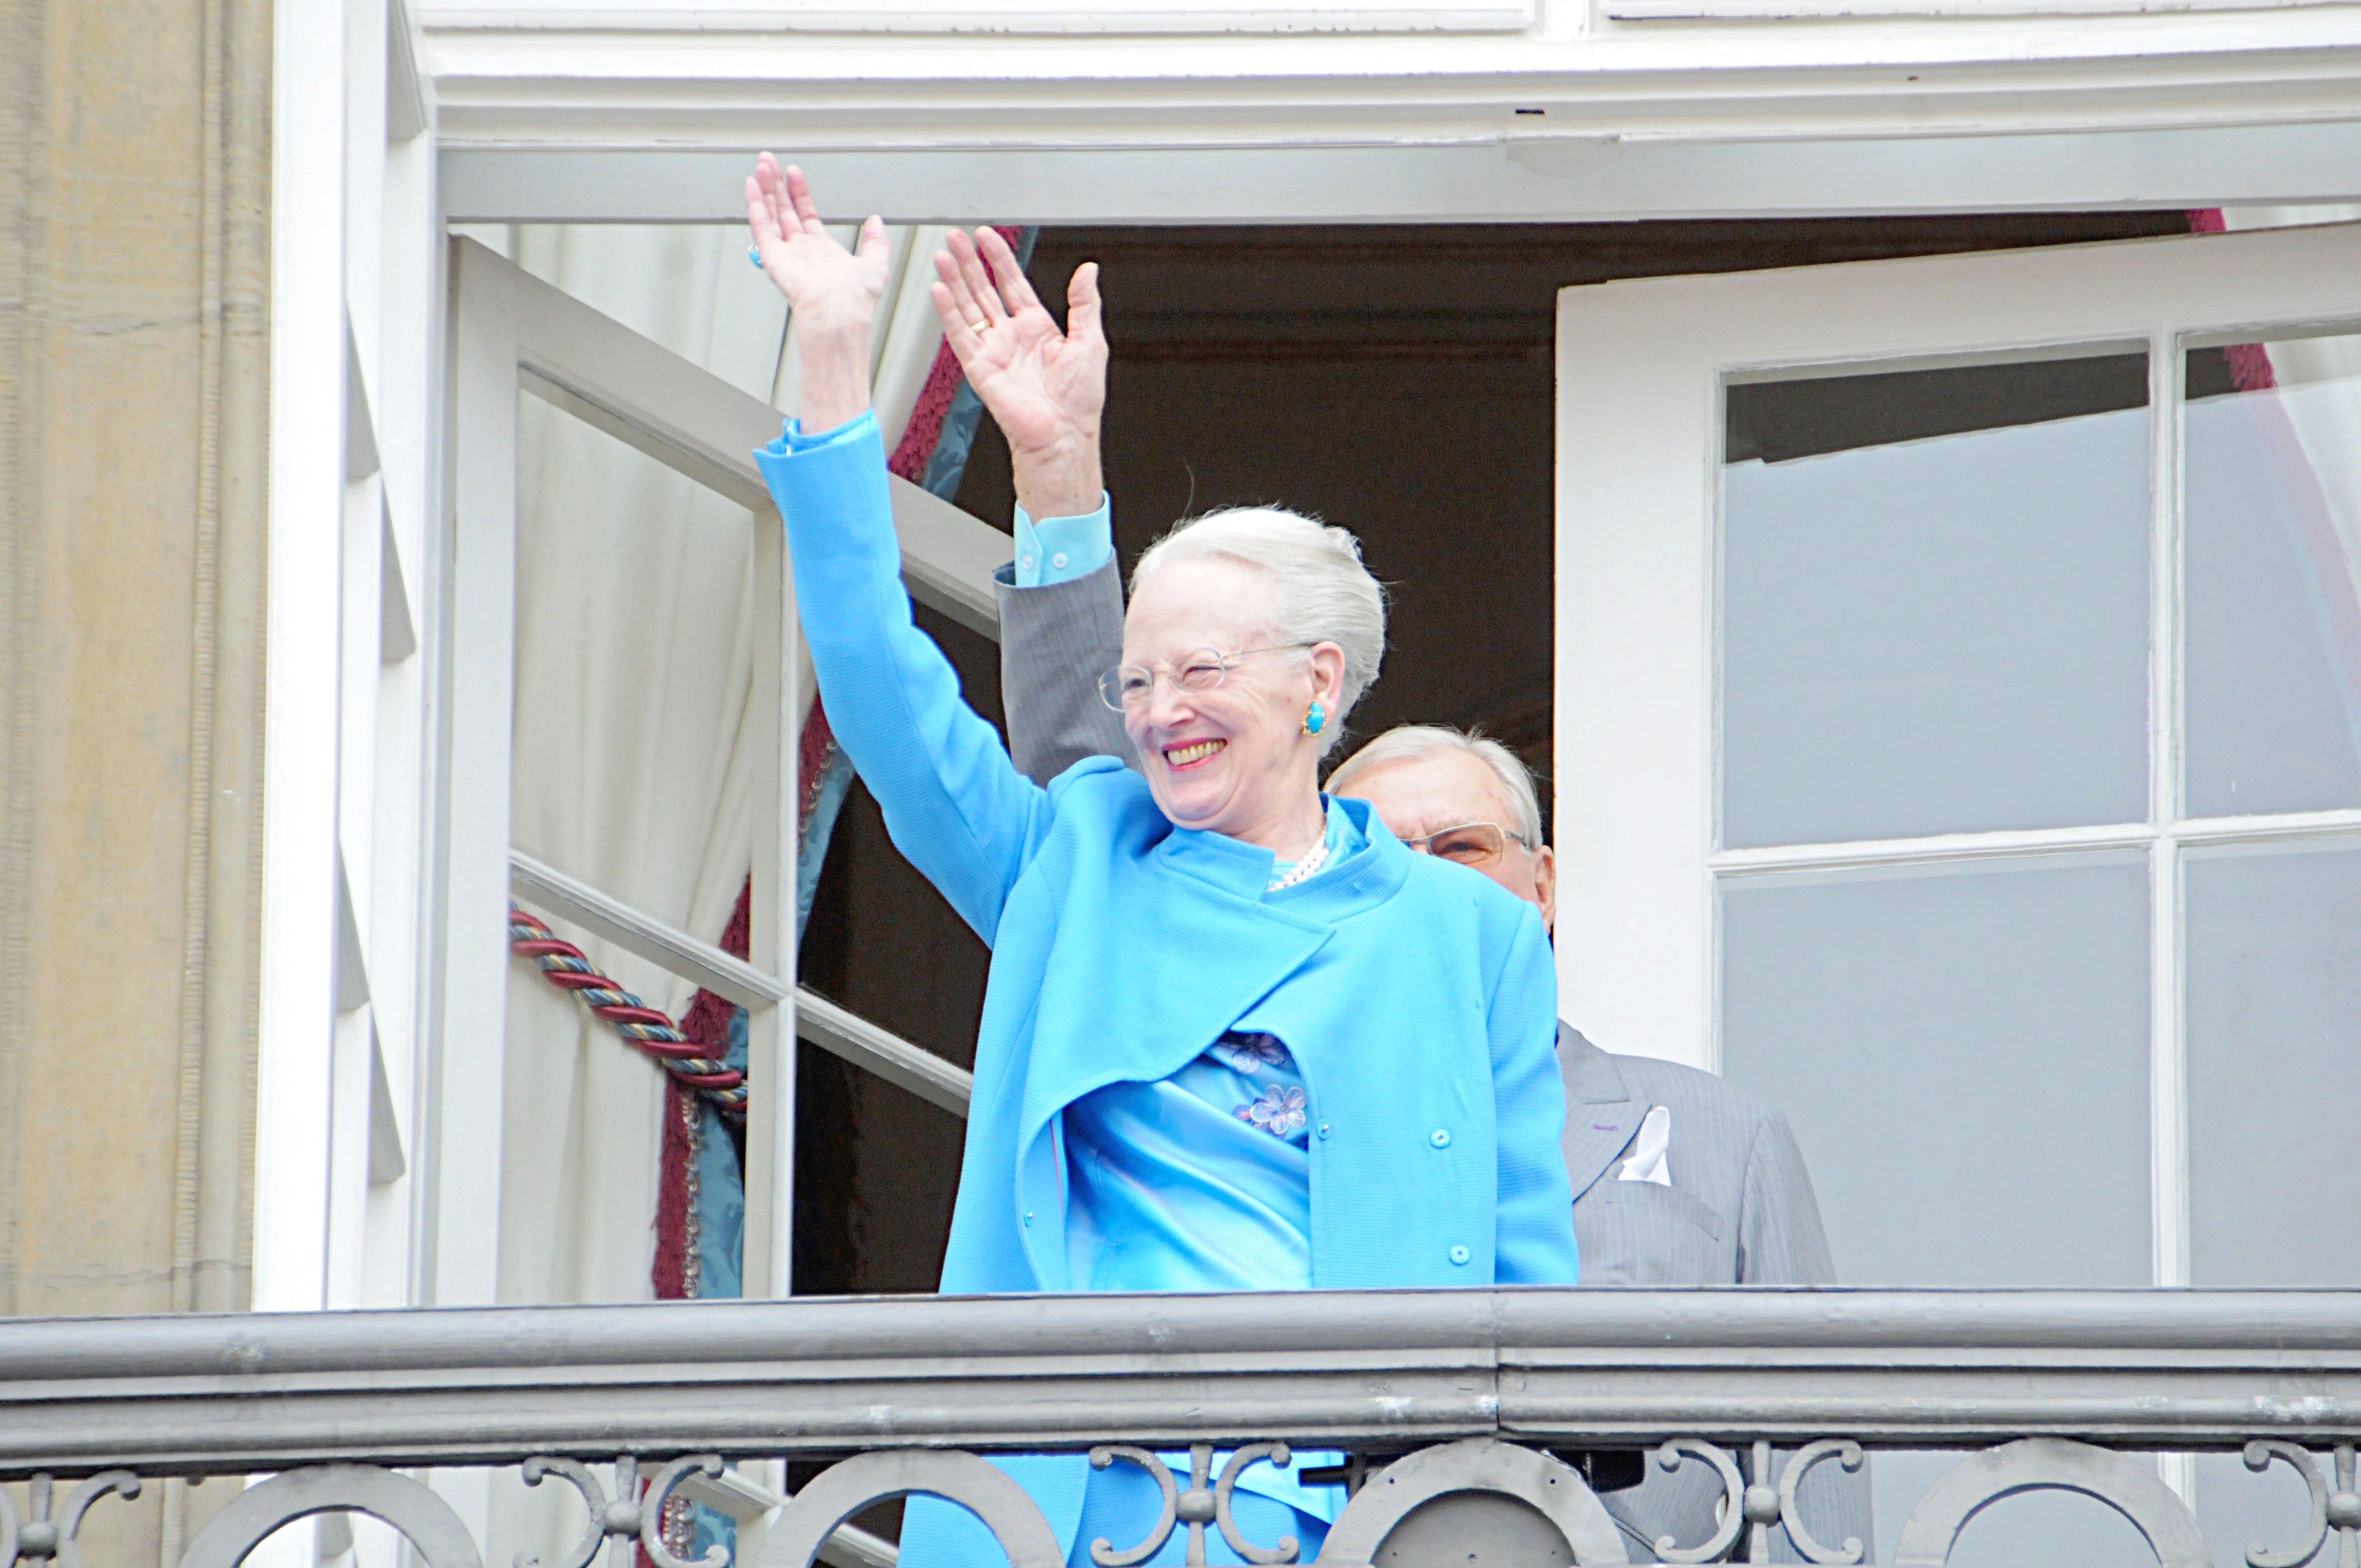 About Town: Happy birthday your majesty!